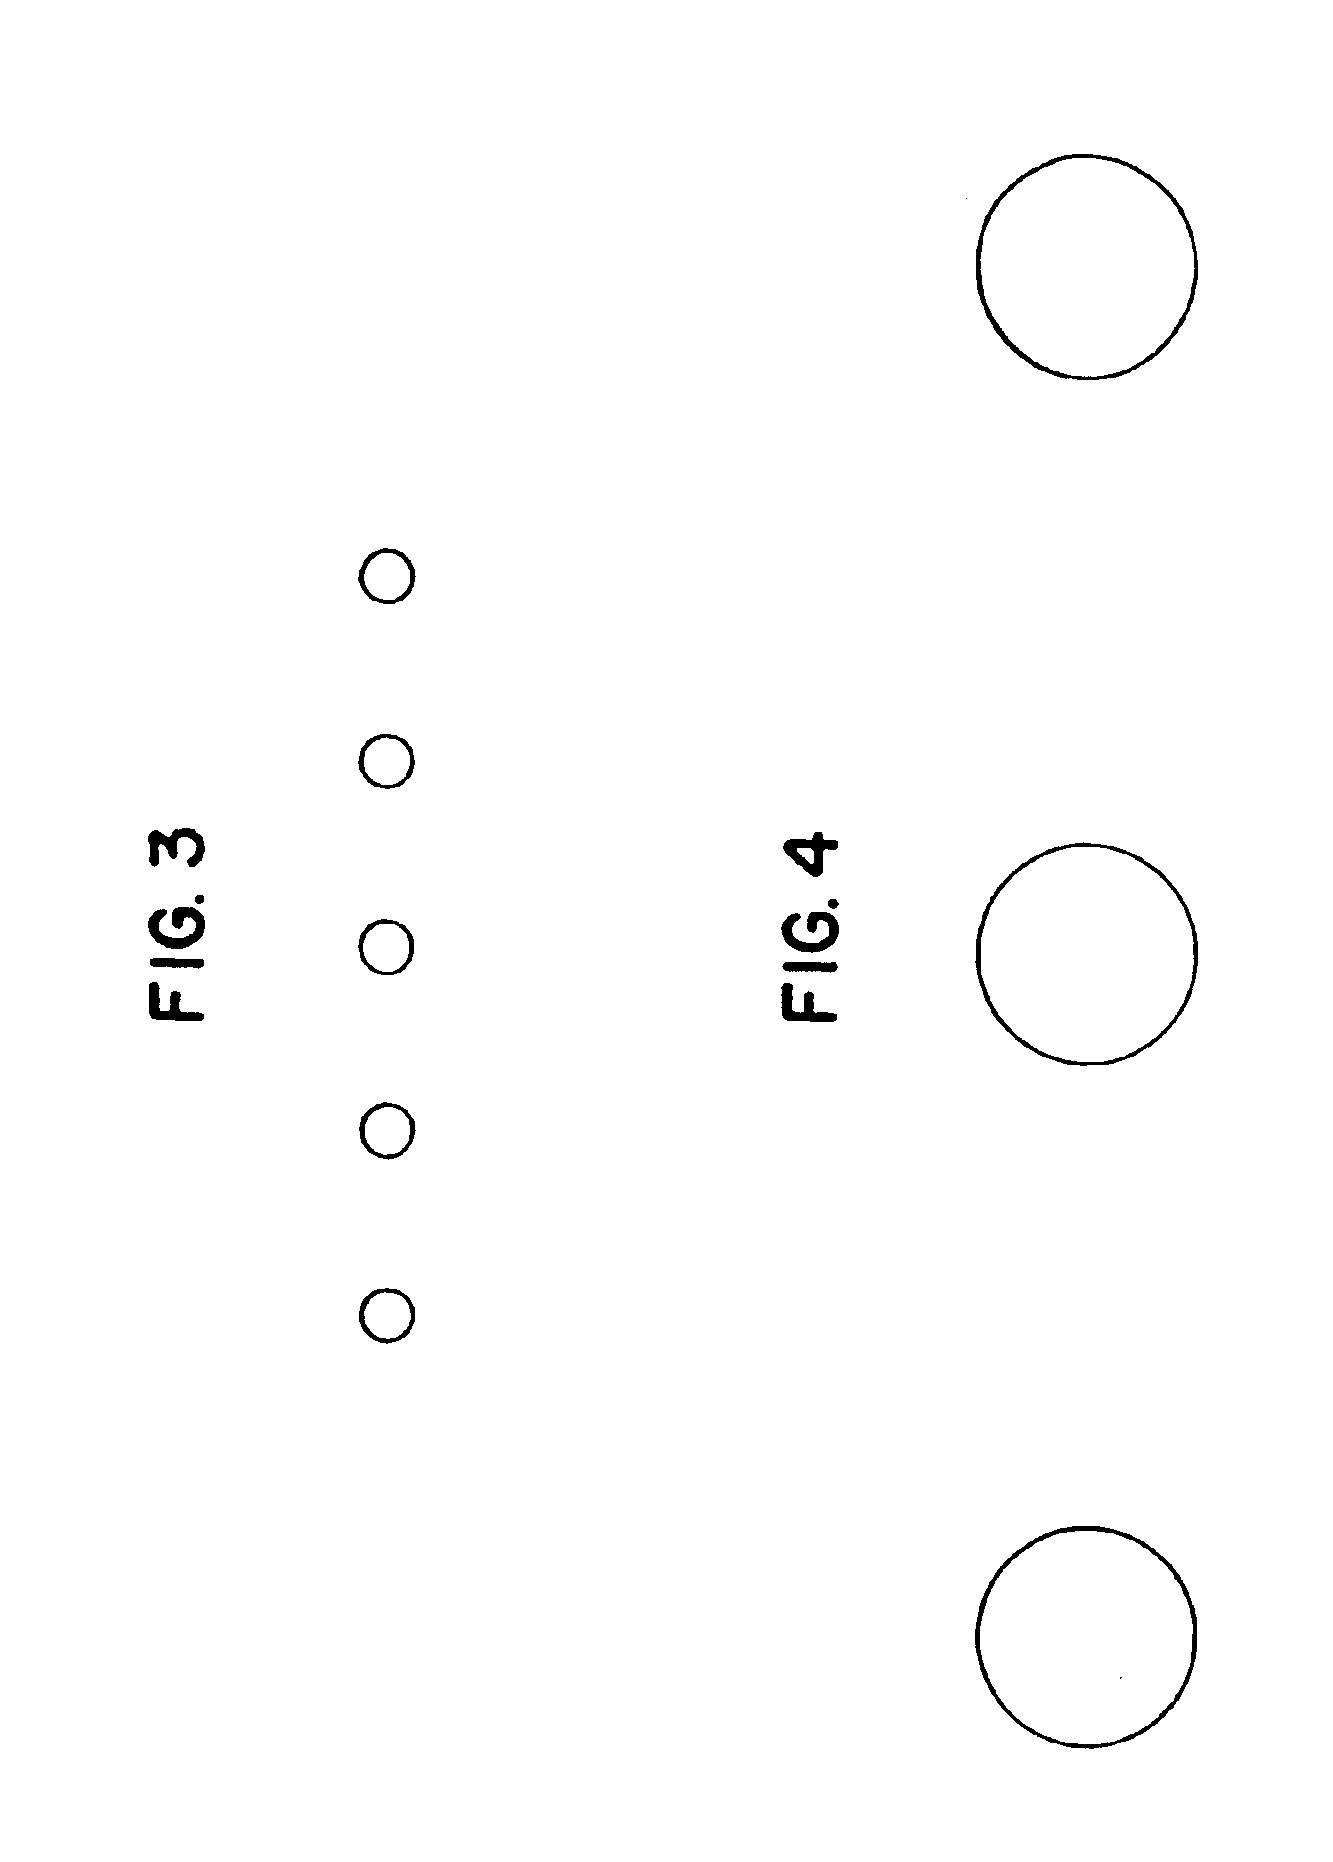 Filter material construction and method